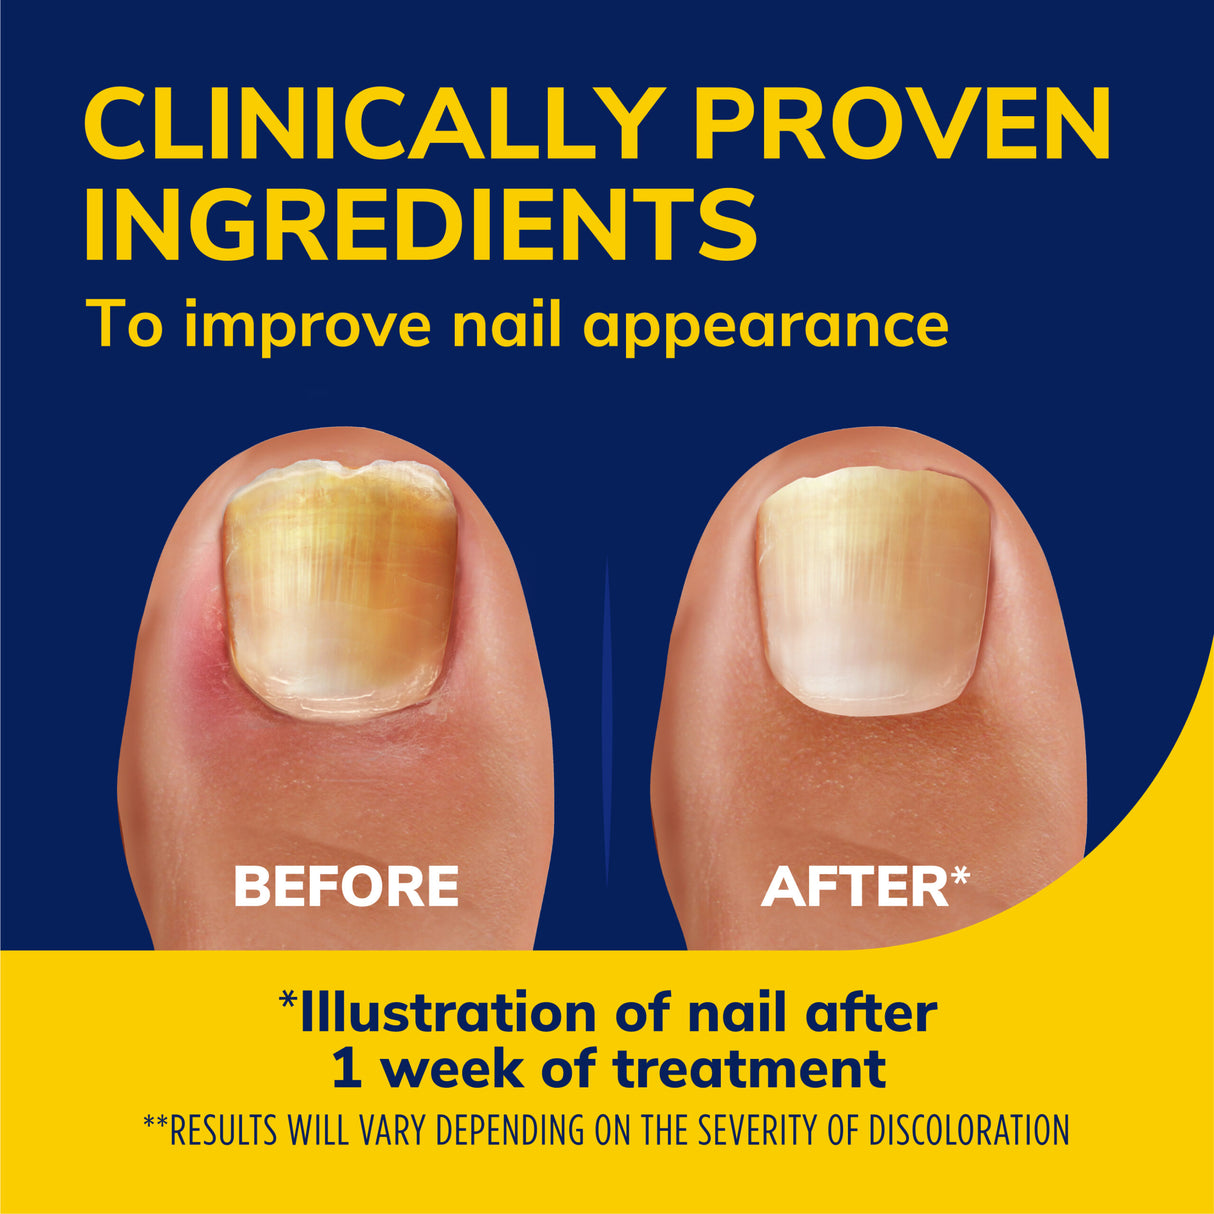 image of clinically proven ingredients to improve nail appearance